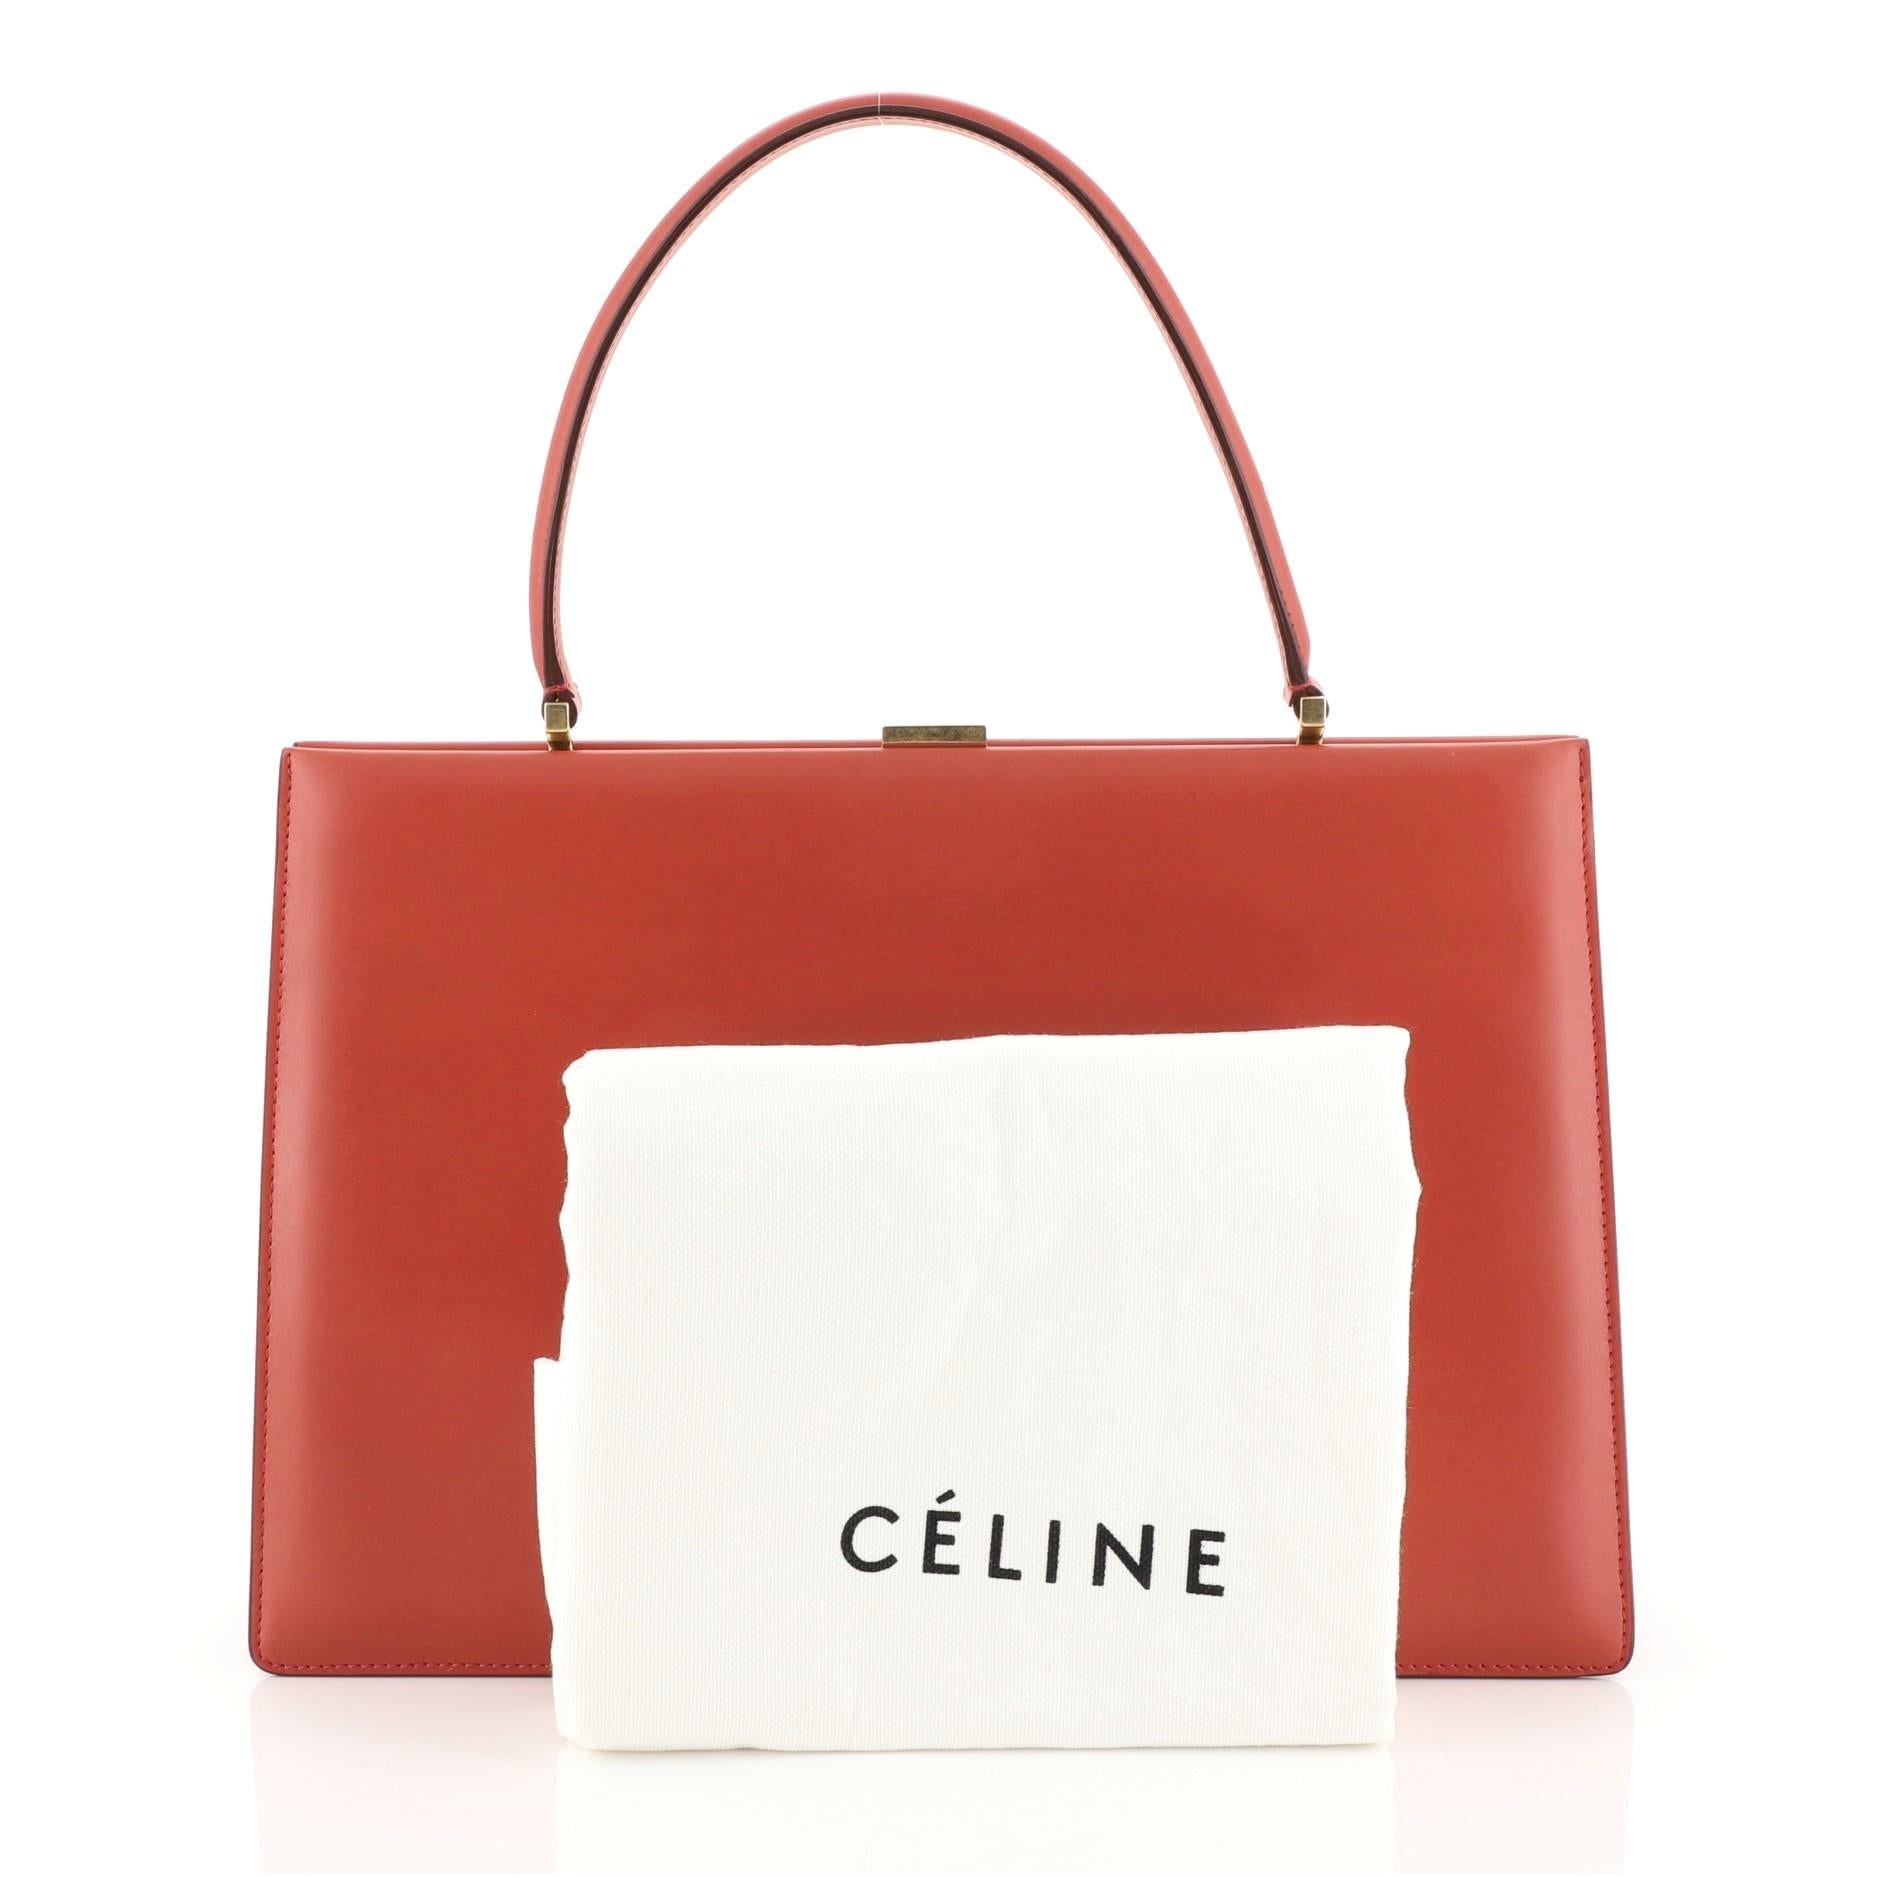 This Celine Clasp Top Handle Bag Leather Medium, crafted in red leather, features a leather top handle, stamped Celine logo, framed top, and gold-tone hardware. Its clasp closure opens to a black leather interior divided into two compartments with a